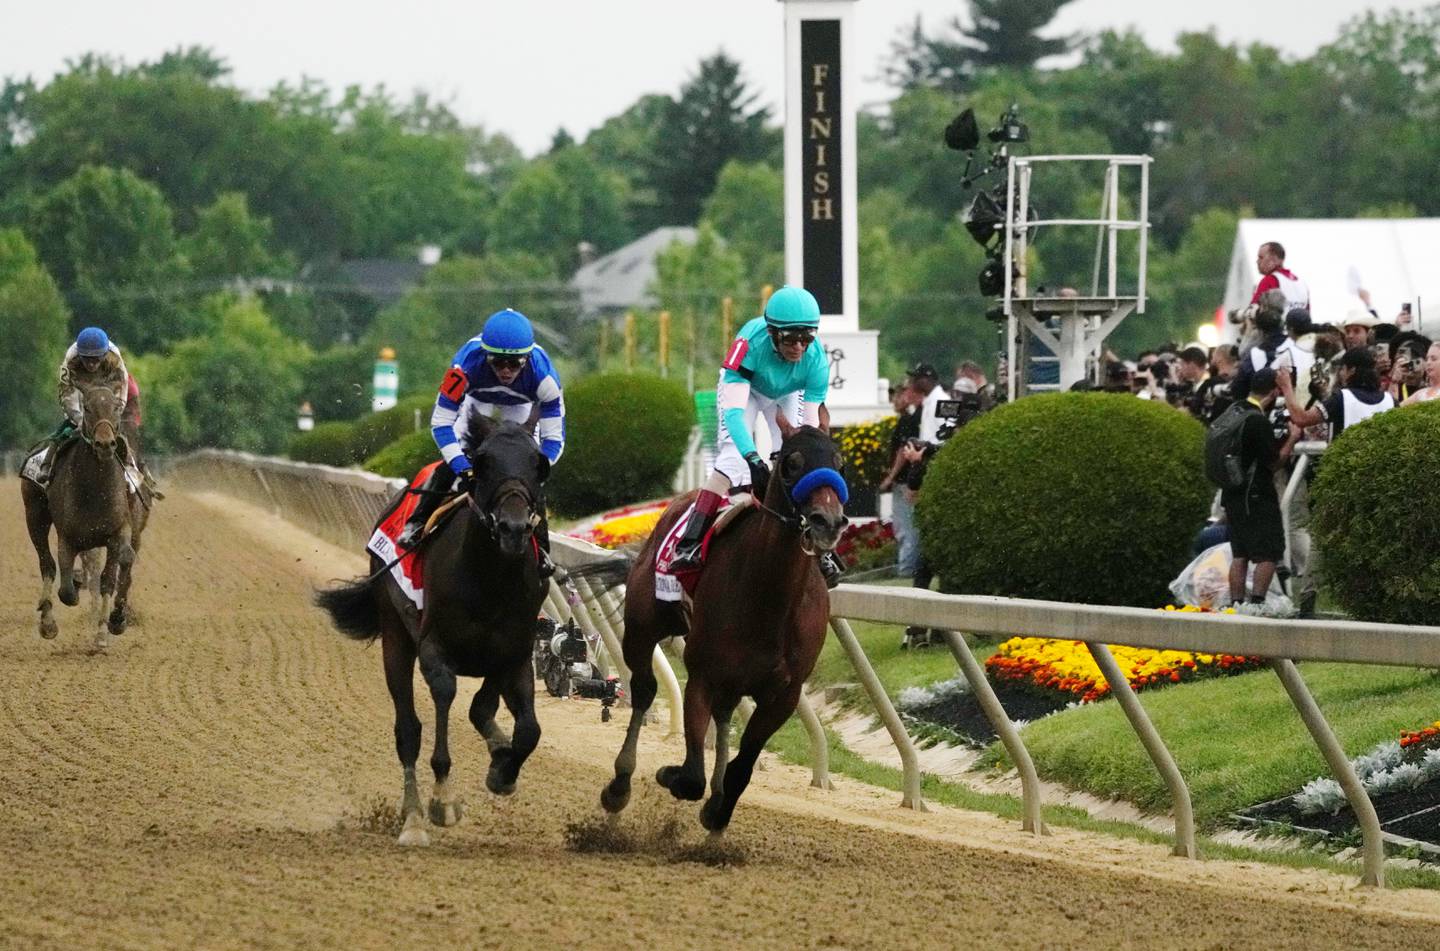 National Treasure wins the 148th Preakness Stakes.